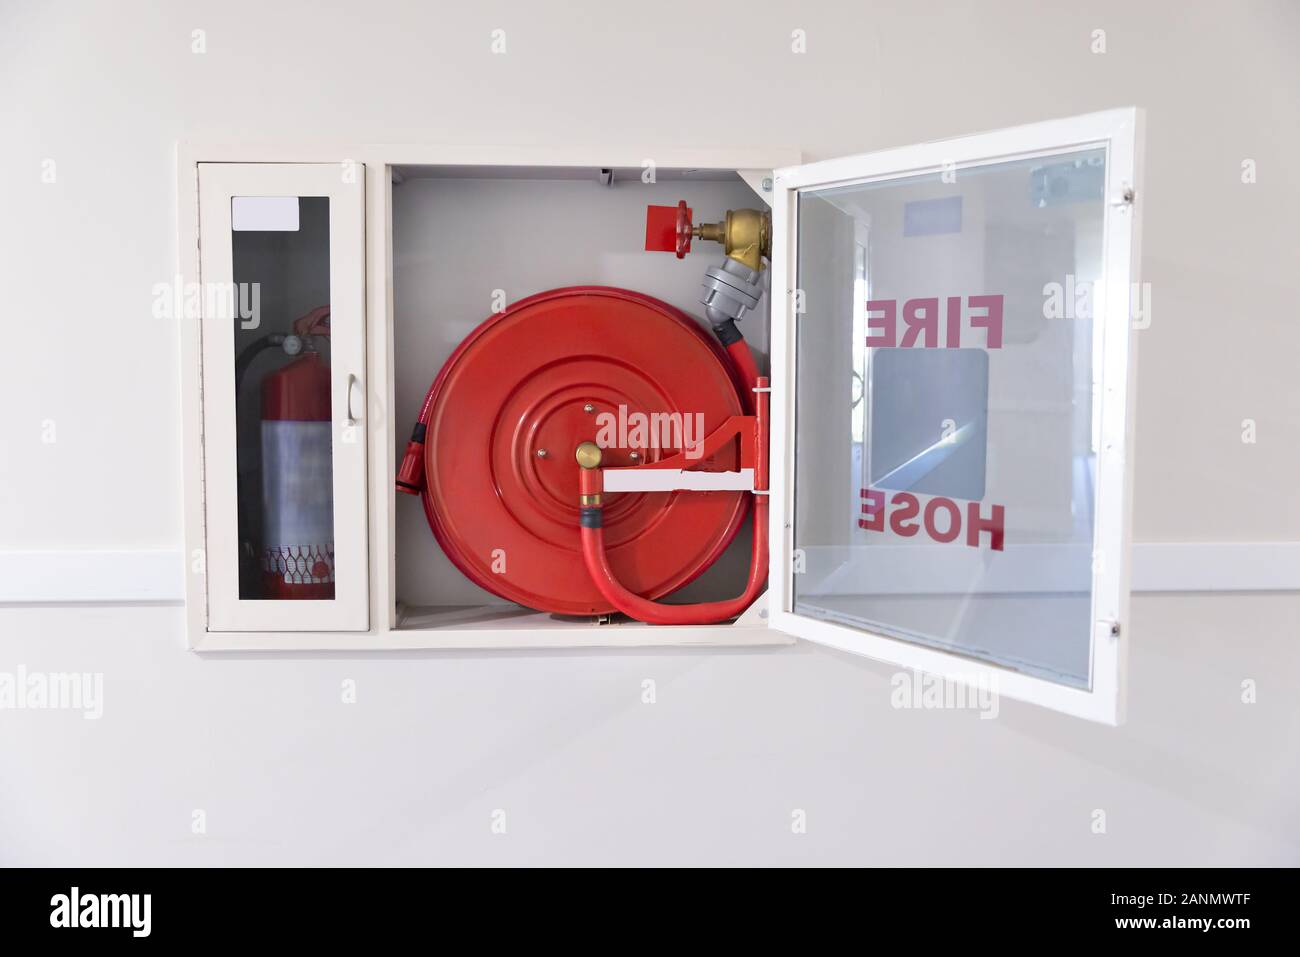 Fire Hose Reel And Fire Extinguisher In Hotel Corridor Stock Photo